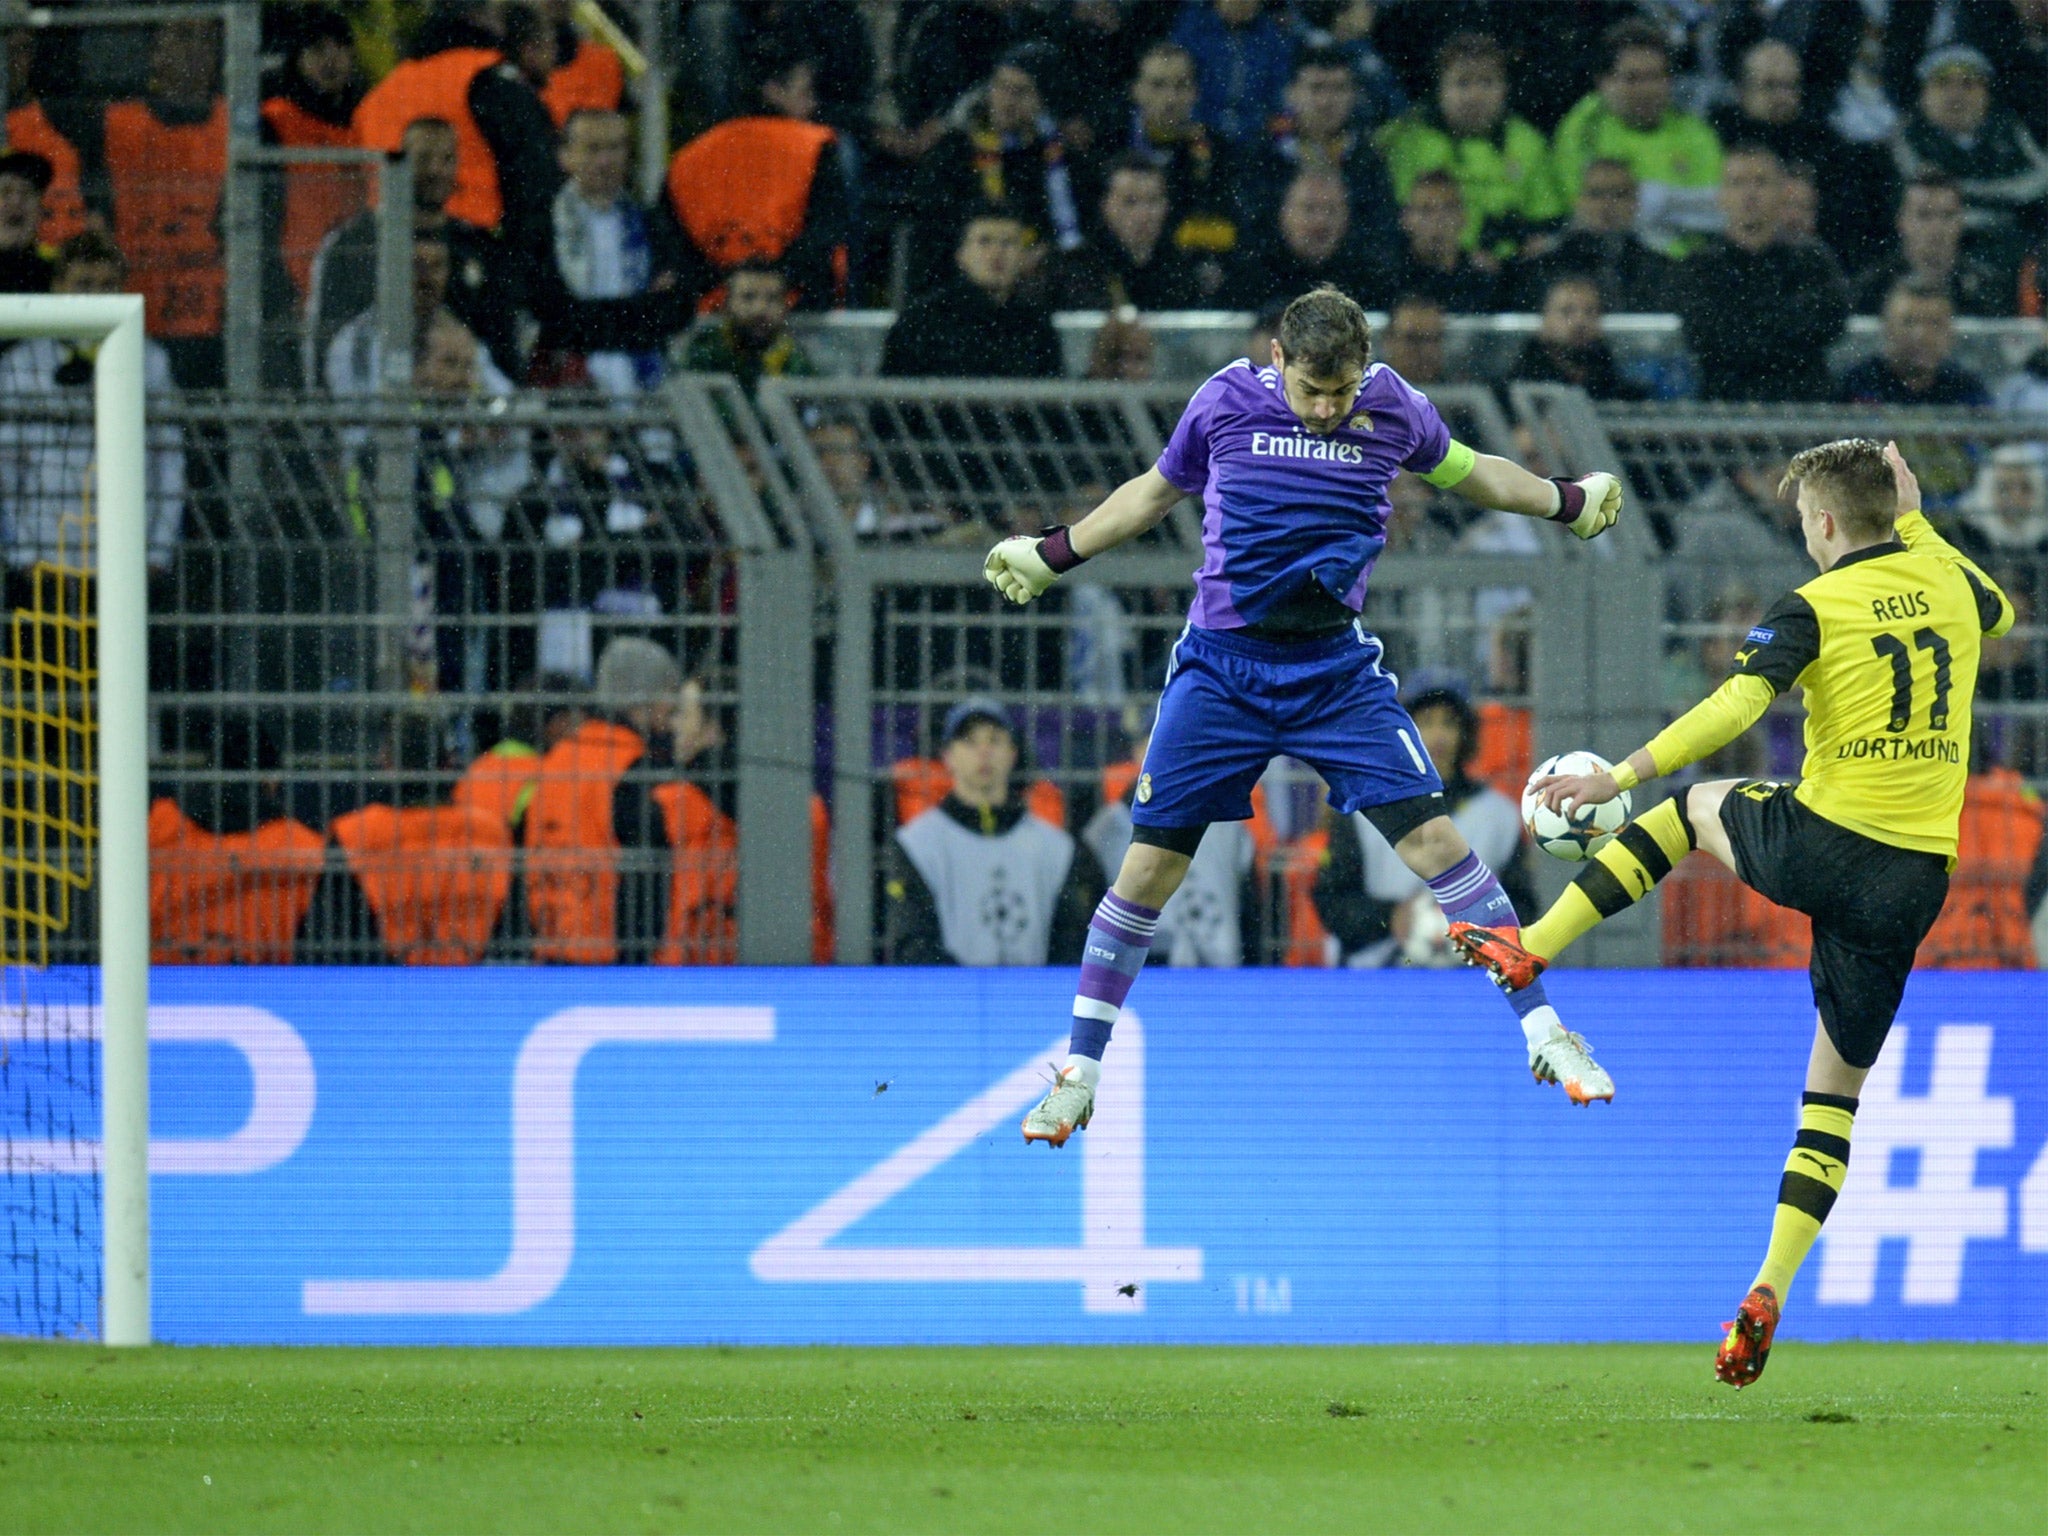 Marco Reus rounds an exposed Iker Casilas to give Dortmund the lead and hope of overturning the tie